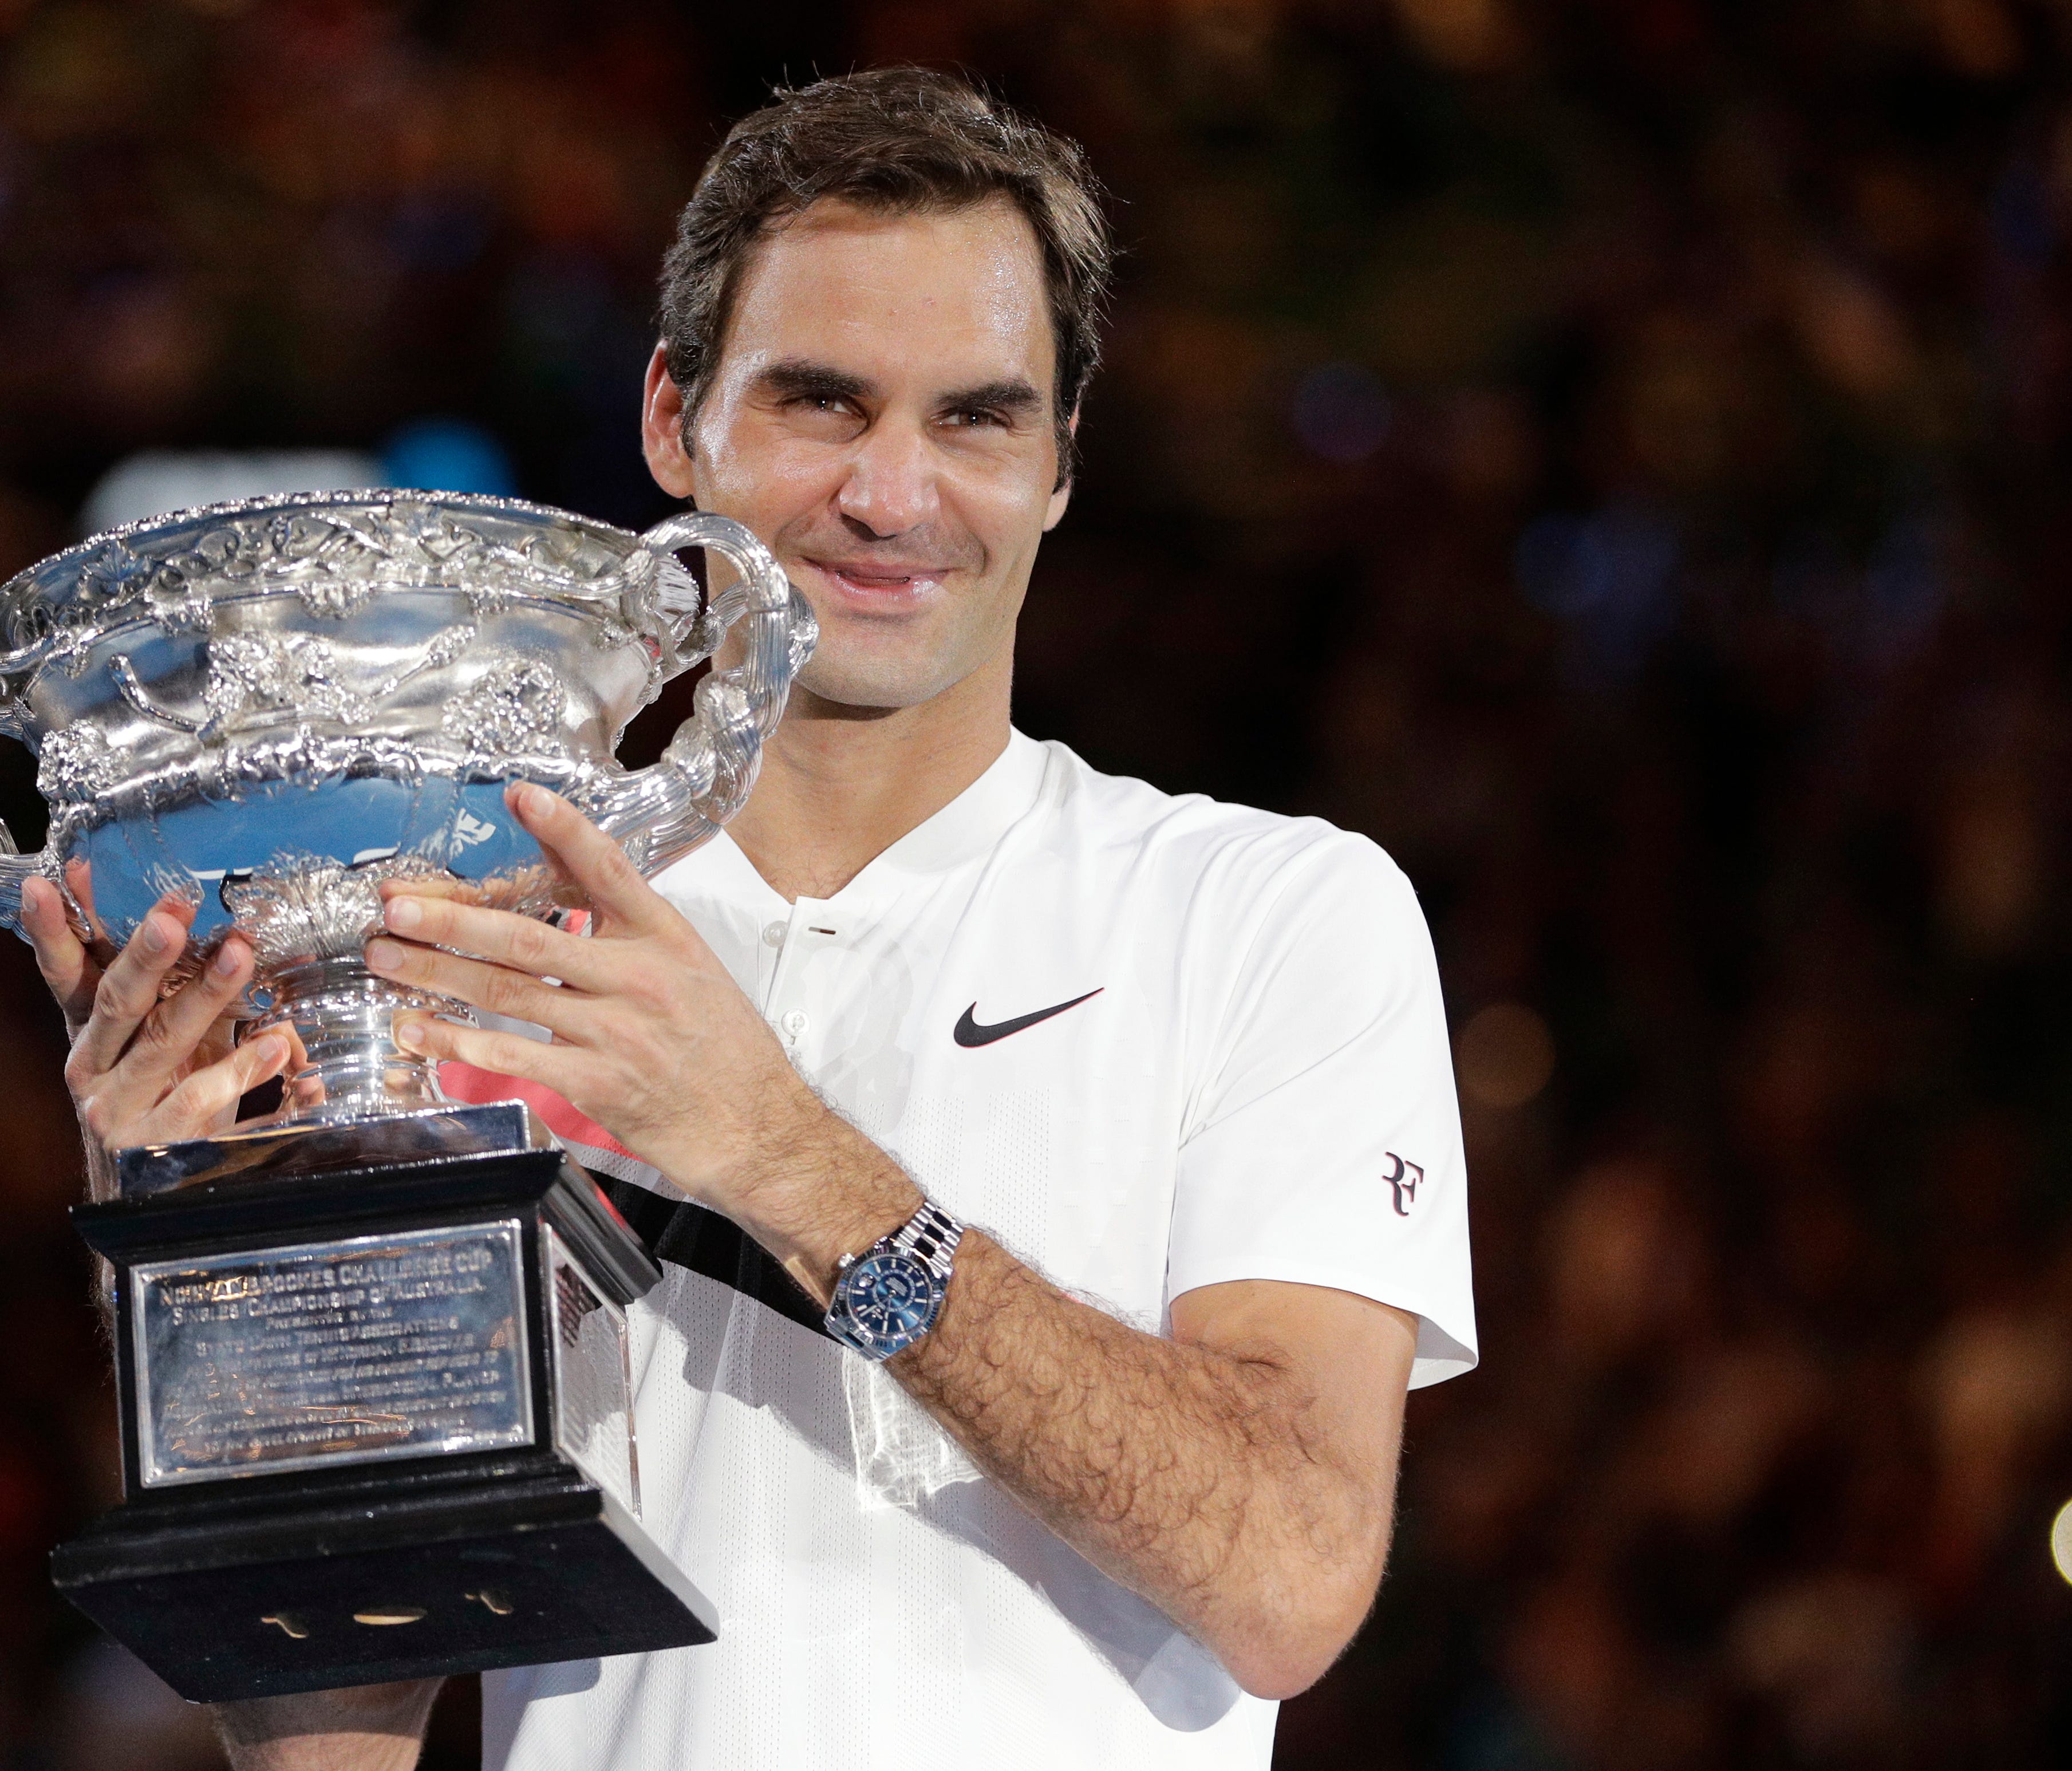 Roger Federer holds the trophy after winning the Australian Open on Sunday.